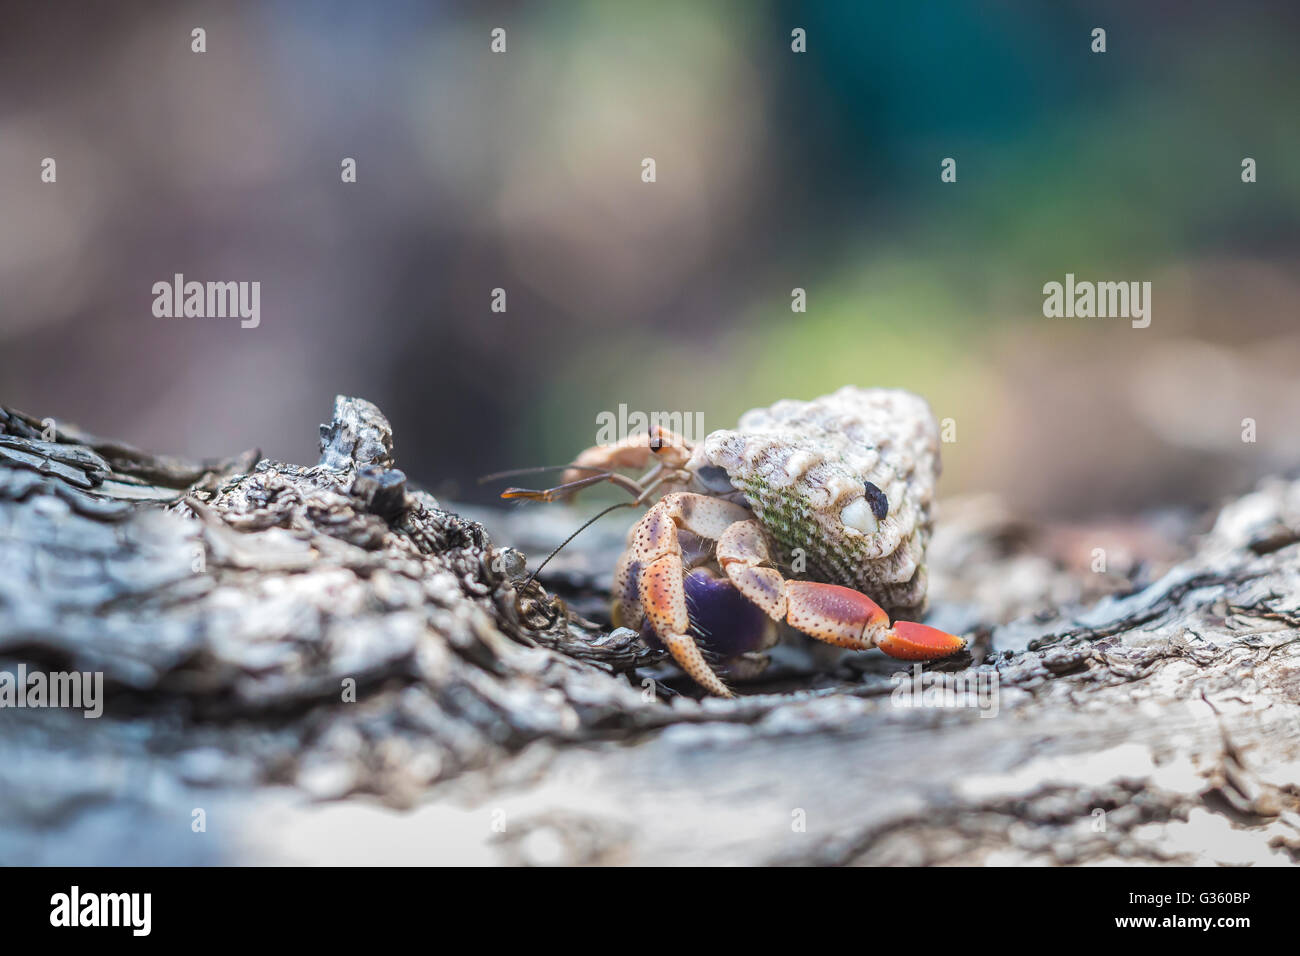 Caribbean Hermit Crab, Coenobita clypeatus, outside Fort Jefferson in Dry Tortugas National Park, Florida, USA Stock Photo